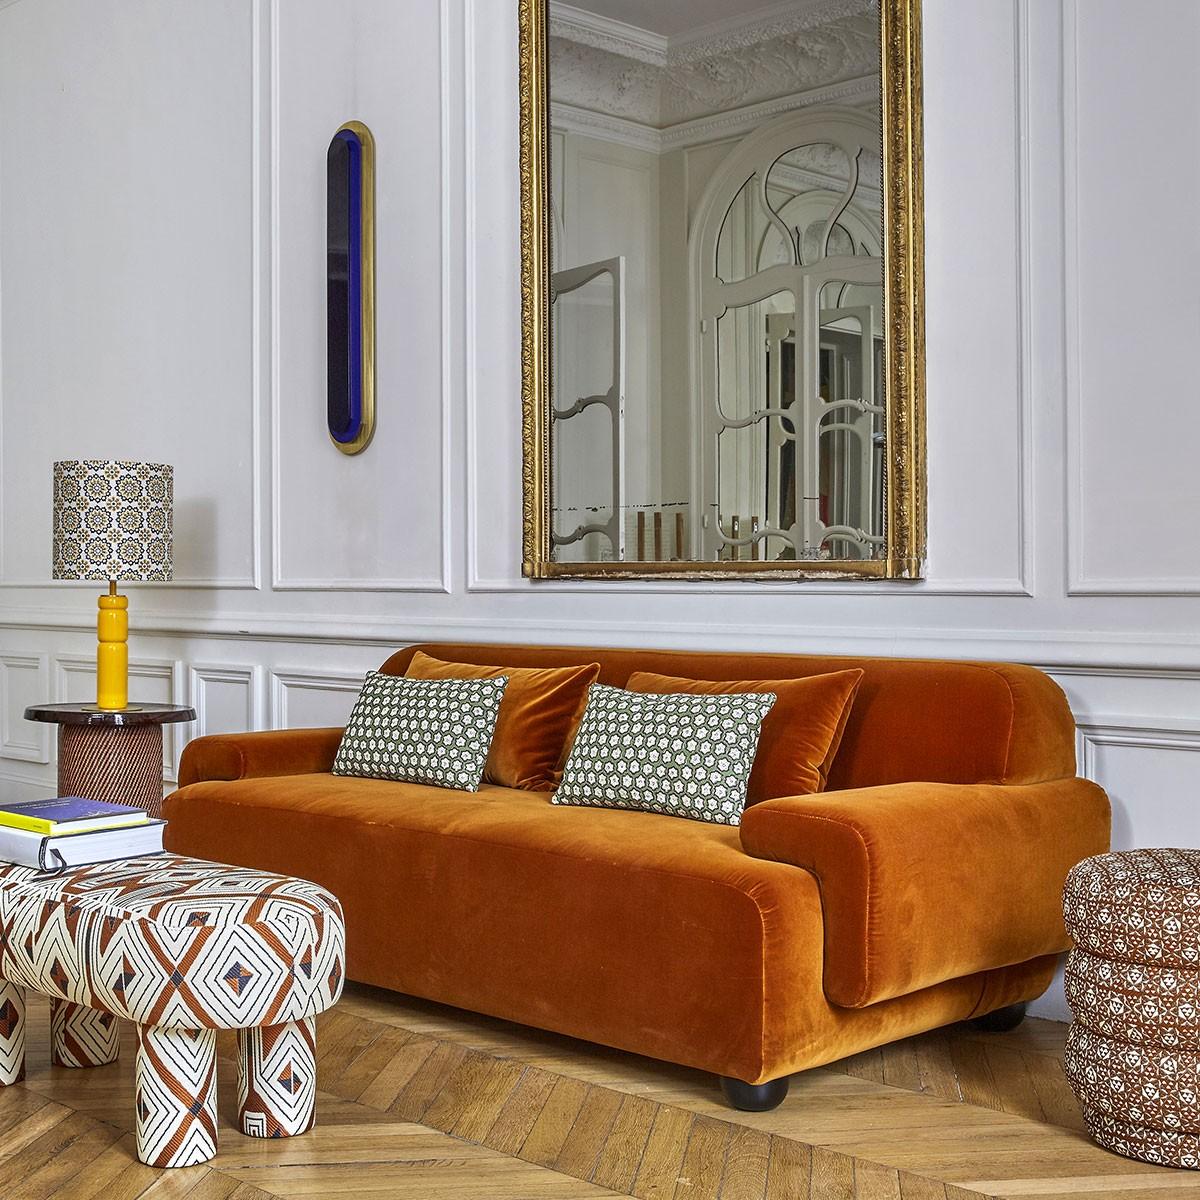 Popus editions lena 4 seater sofa in ocher london linen fabric.

It looks like it's straight out of a movie, with its generous curves and wide armrests. It is a real invitation to spend long Sundays with the family, comfortably seated in front of